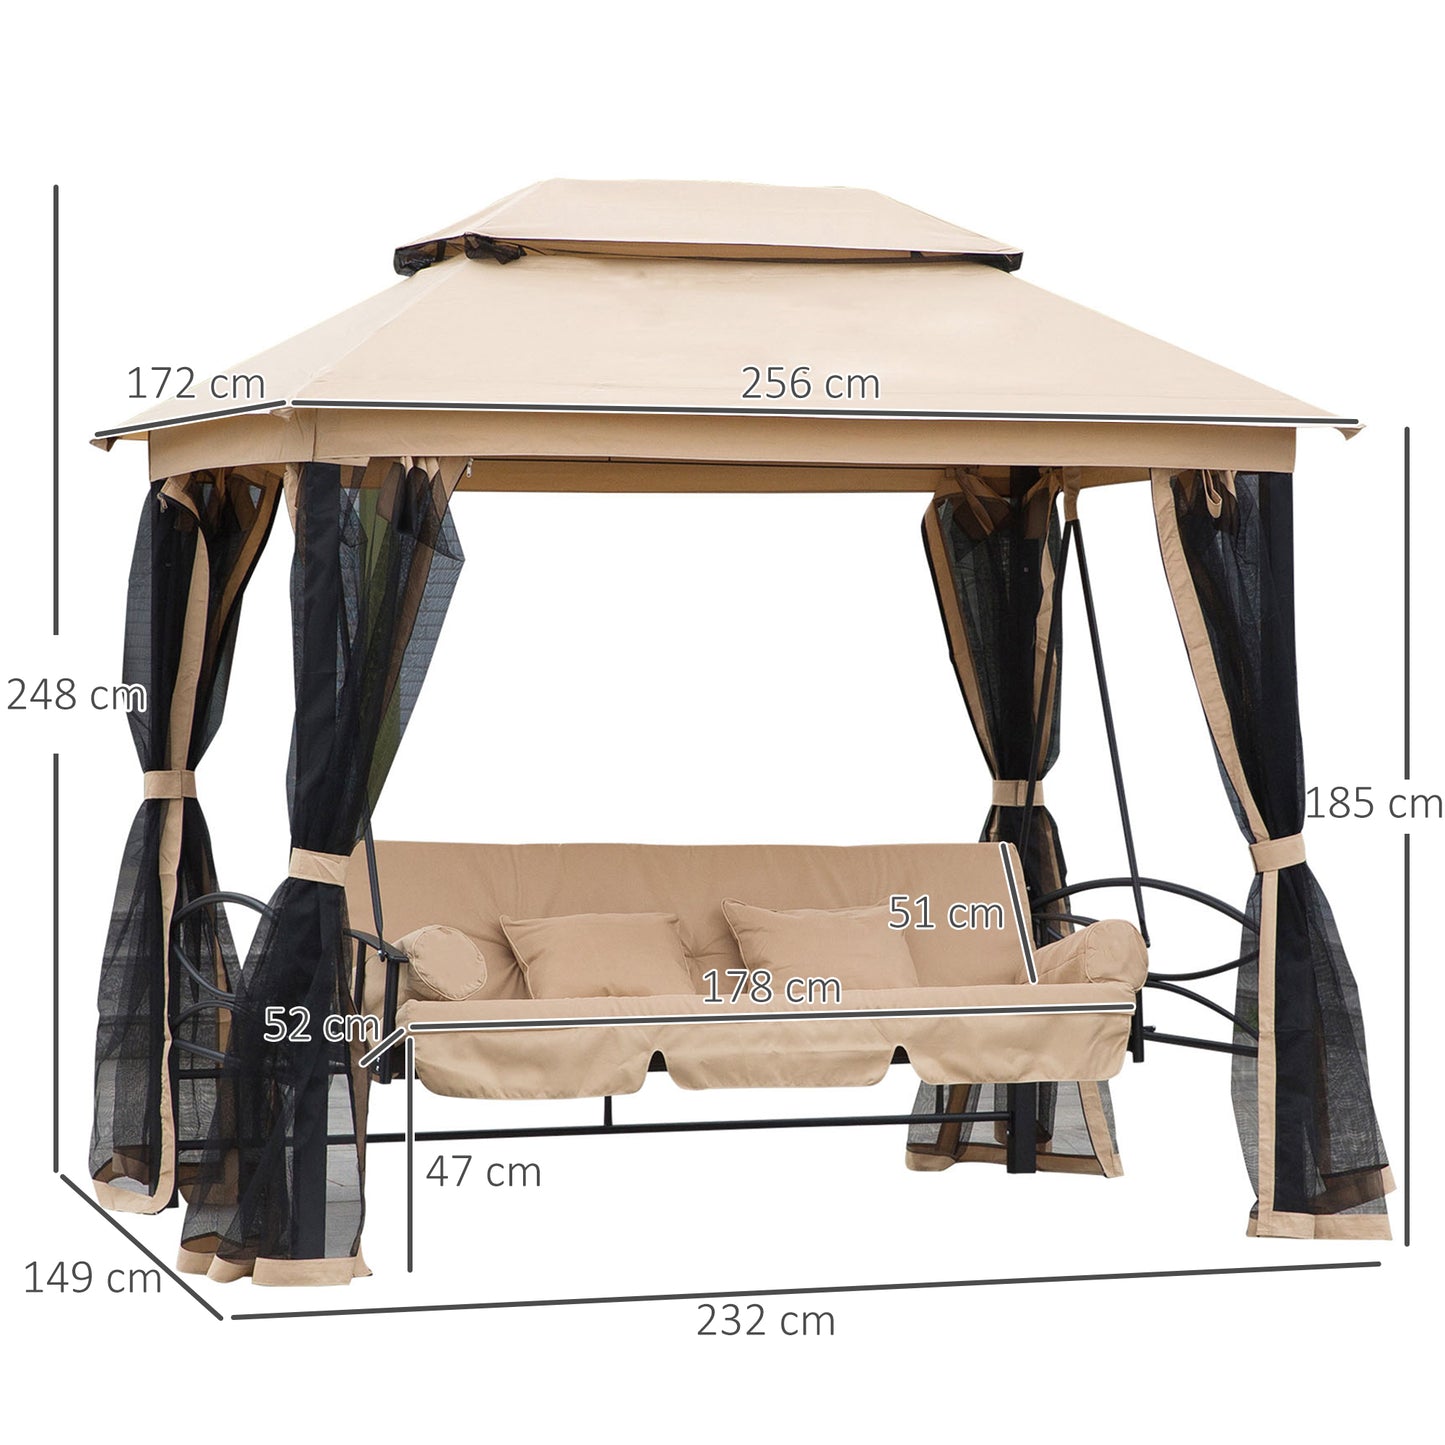 Outsunny 3 Seater Swing Chair 3-in-1 Convertible Hammock Bed Gazebo Patio Bench Outdoor with Double Tier Canopy, Cushioned Seat, Mesh Sidewalls, Beige